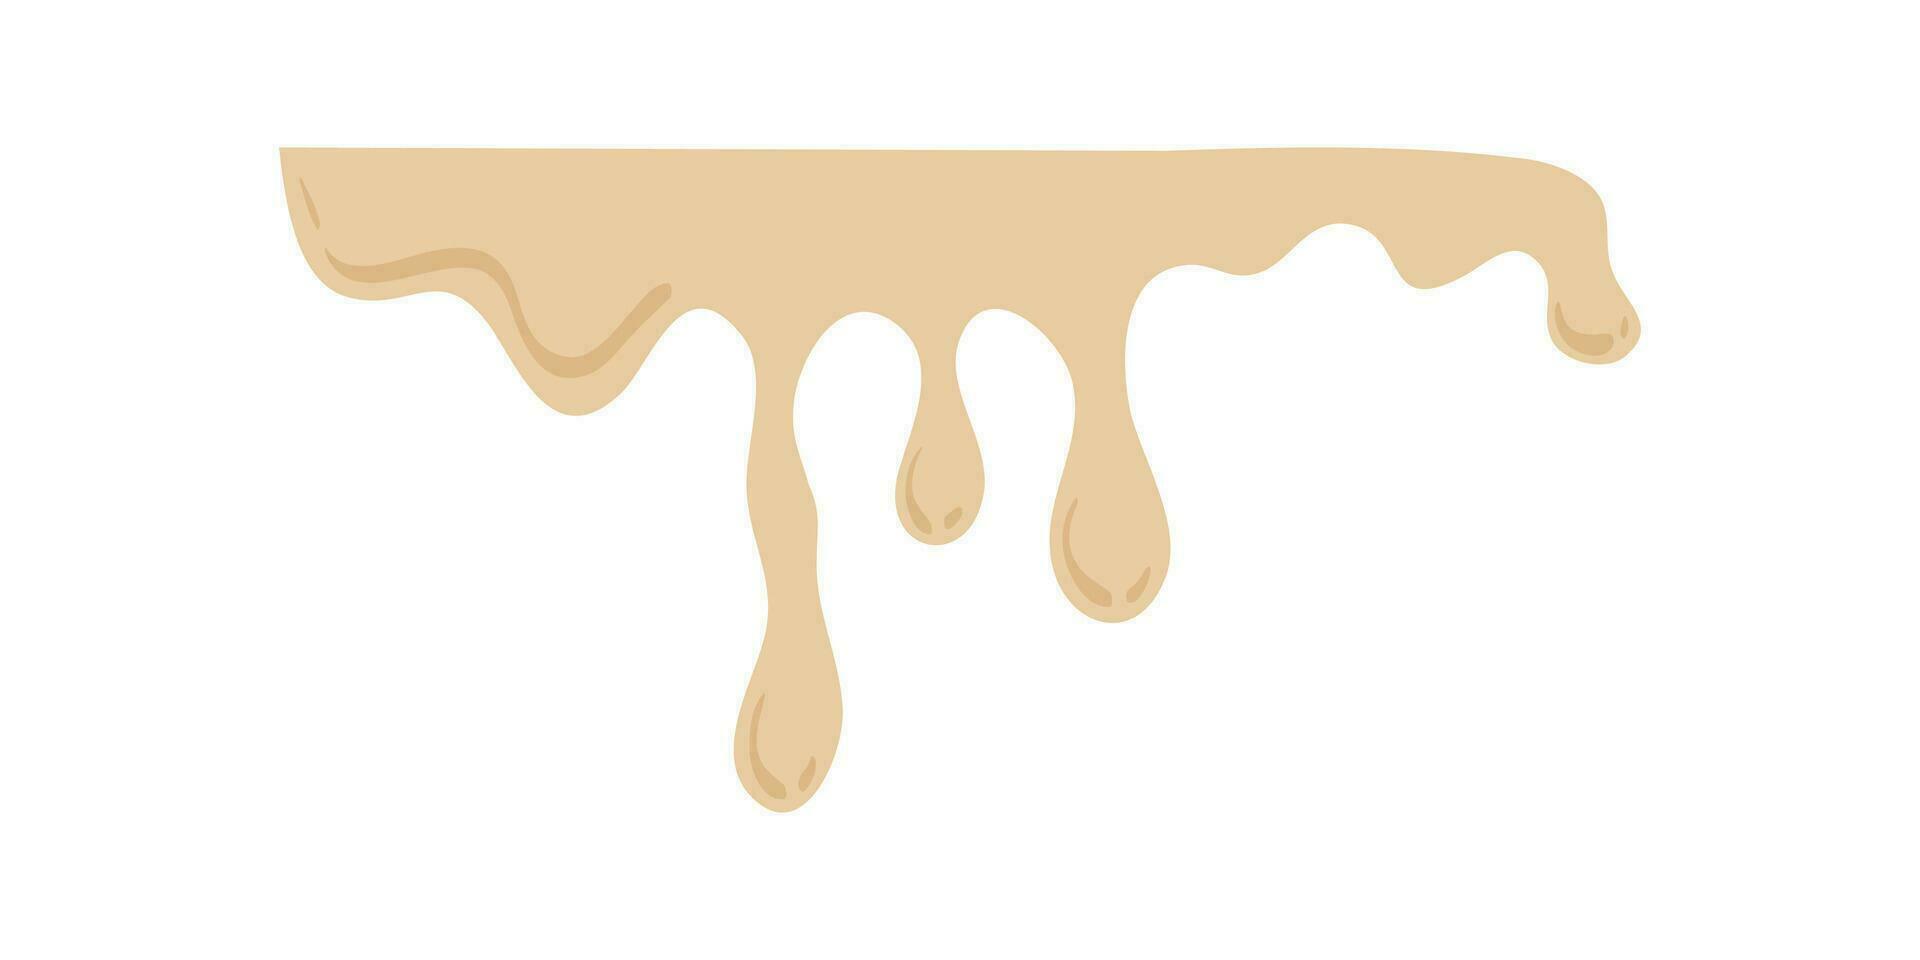 Hand Drawn Melting Choco Illustration. Chocolate drops and blots. Isolated seamless repeatable melted brown and white chocolate flow down vector